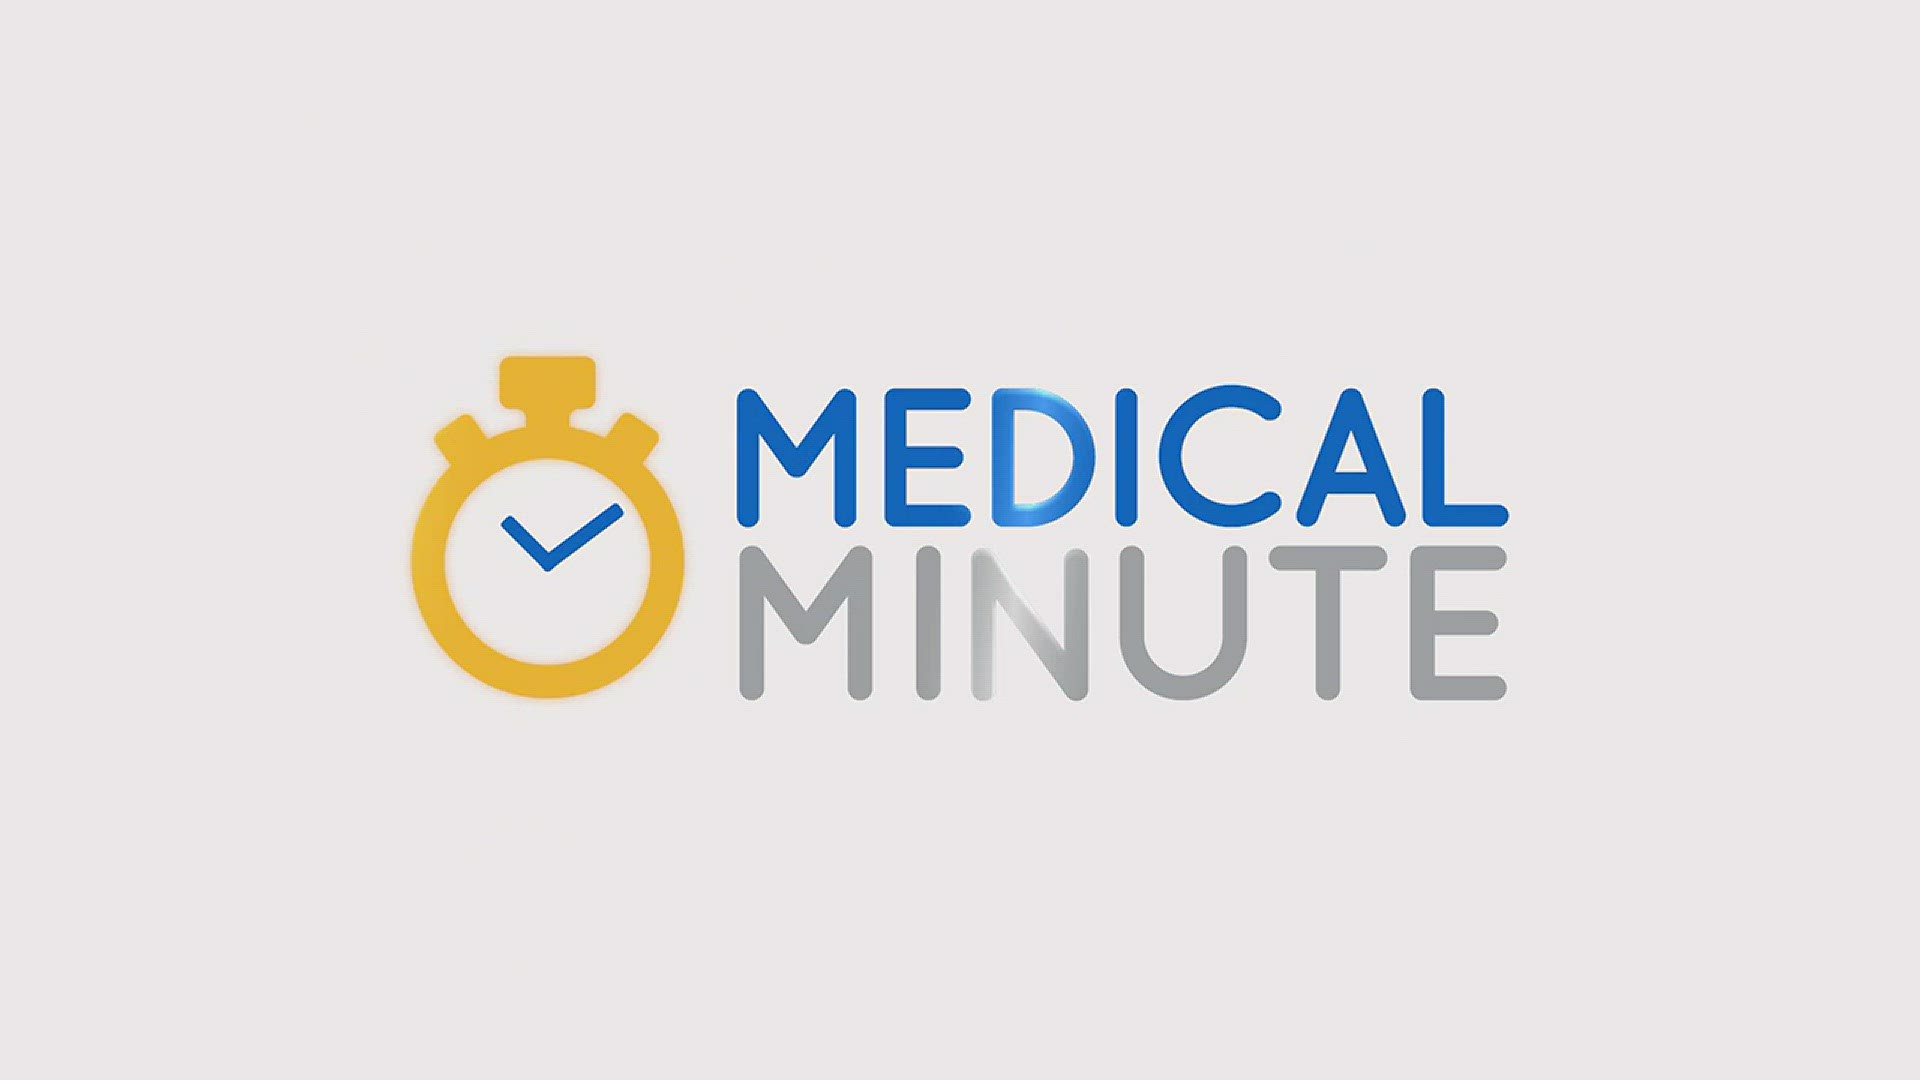 This month's WBIR Medical Minute focuses on your thyroid health.